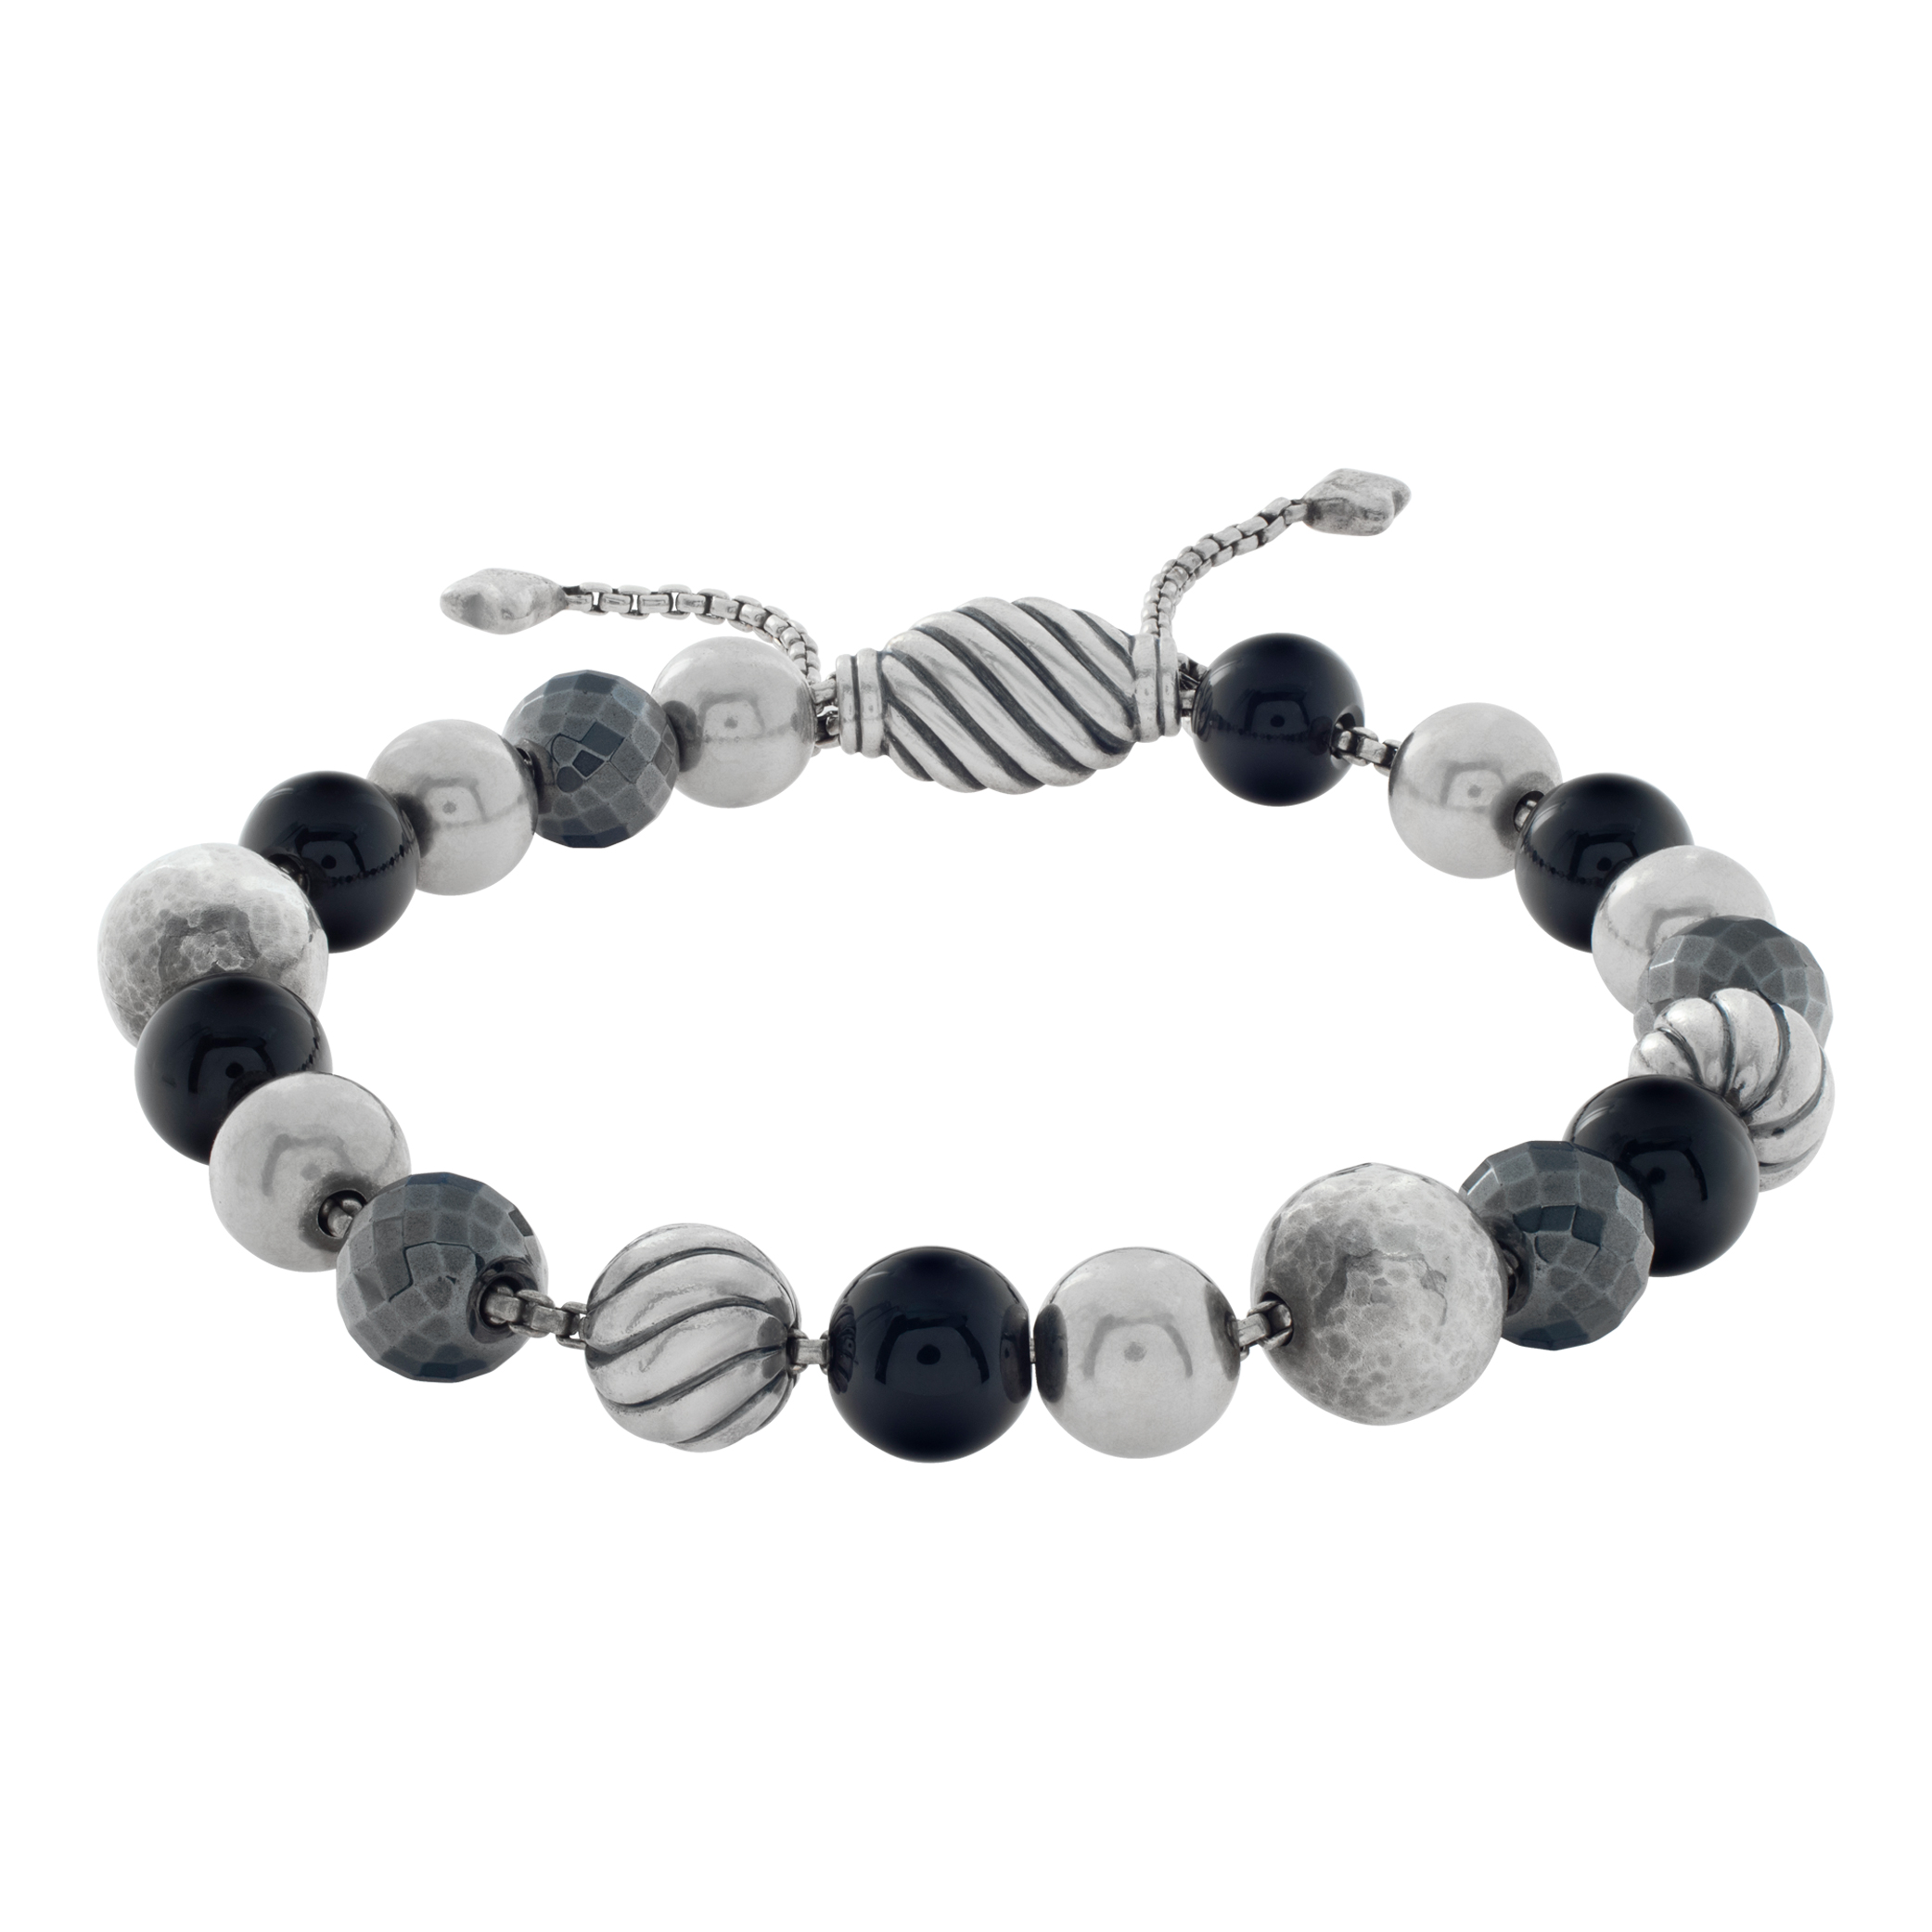 David Yurman Bracelet with Onyx and Hematite Beads in sterling silver